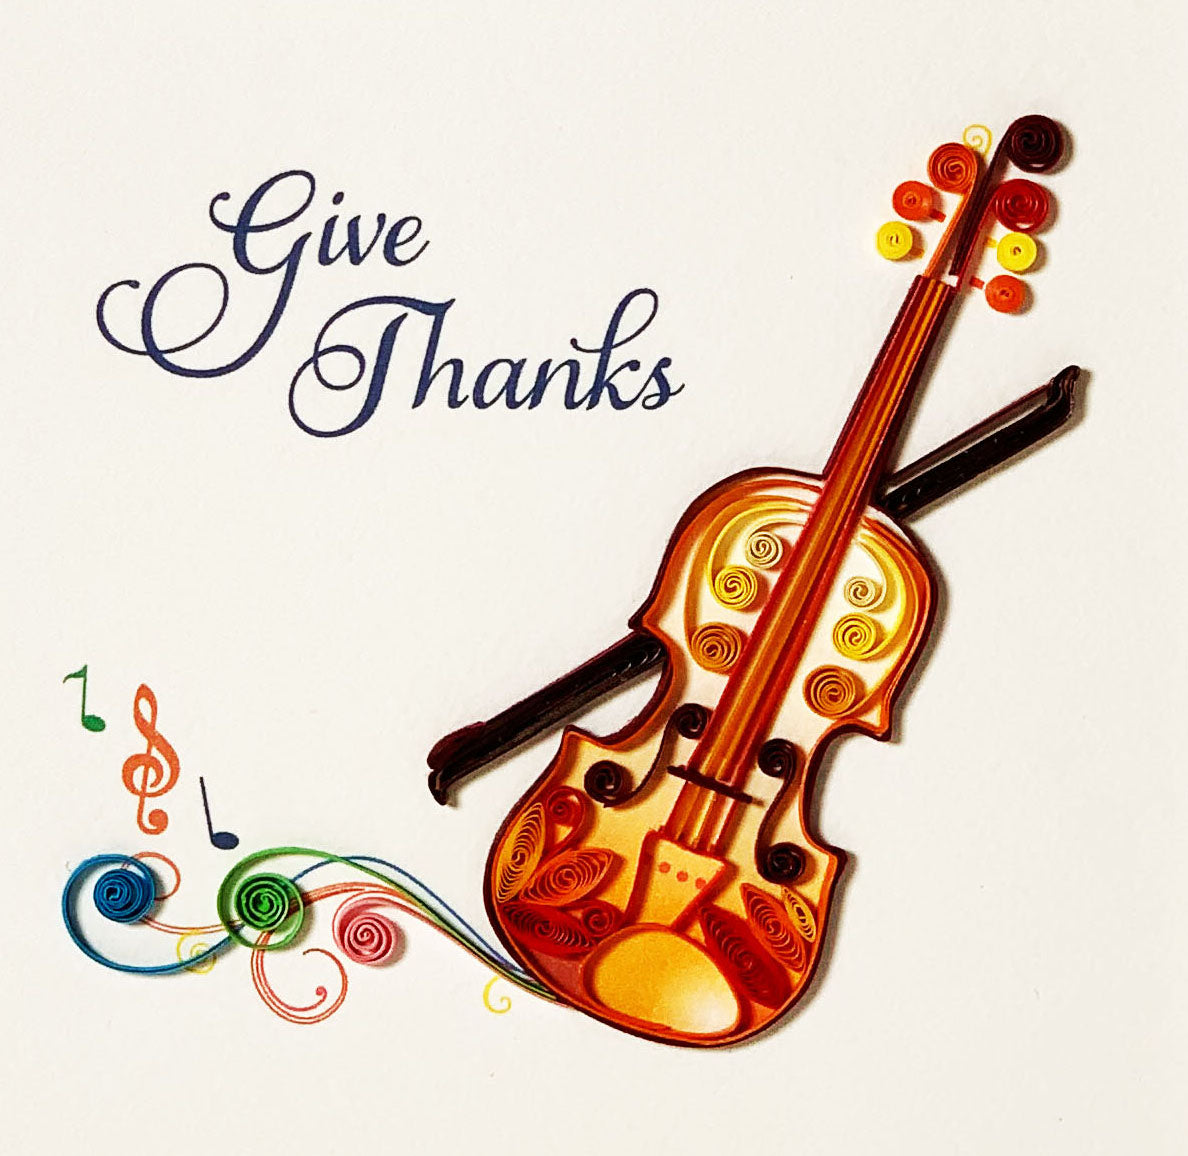 WJL Quilling - Give Thanks